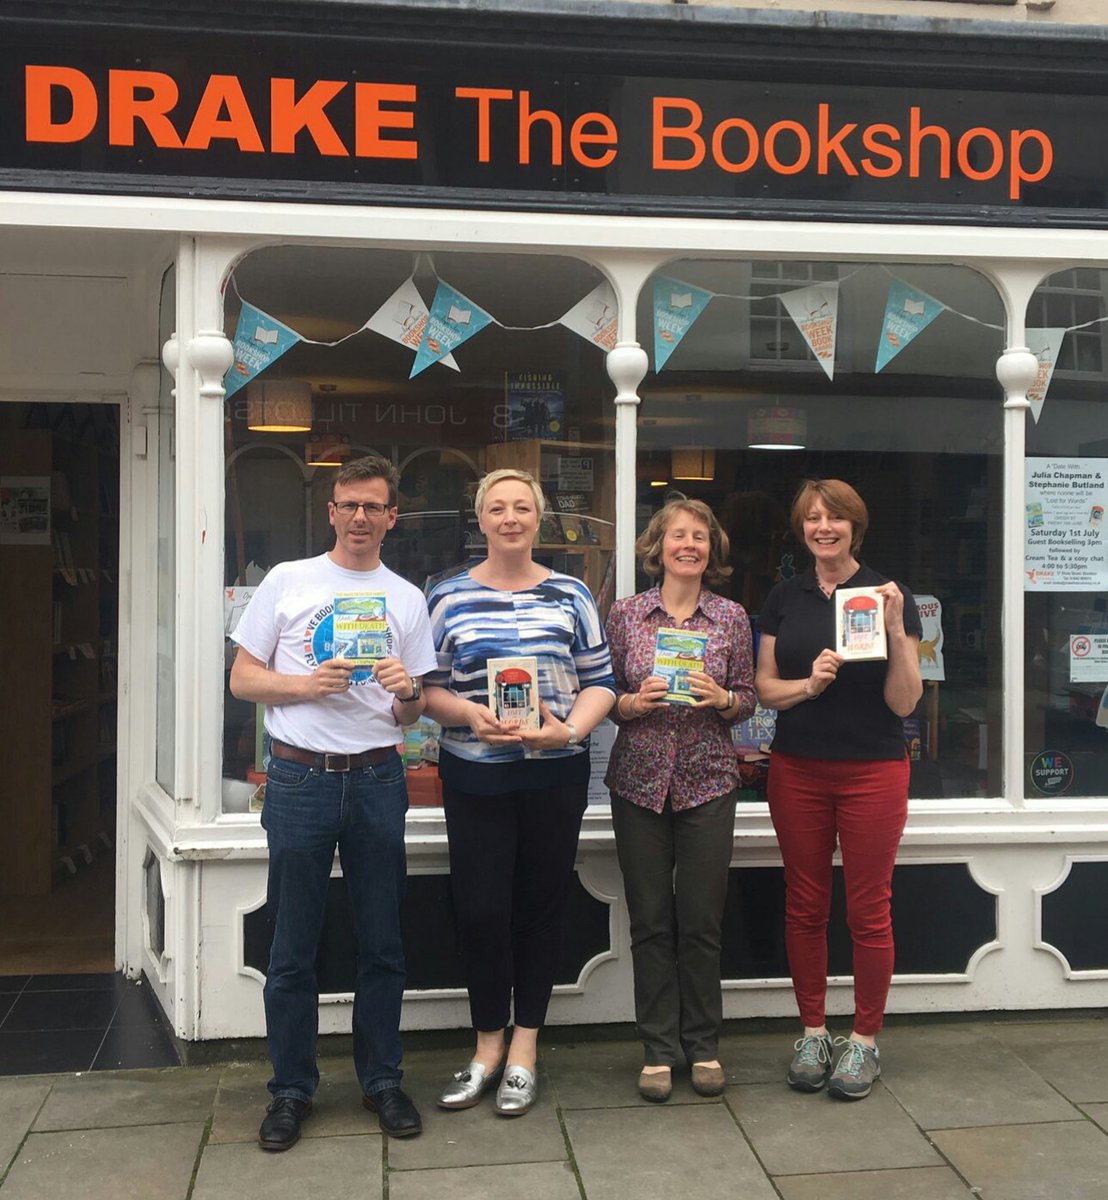 Day 4: A double-header of double brilliance:  @drakebookshop in Stockton, who are doing amazing things within their community and  @StripeyBadgers in Grassington, who have quickly become a vital part of village life. Both offering home delivery. So go on.  #BackABookshop